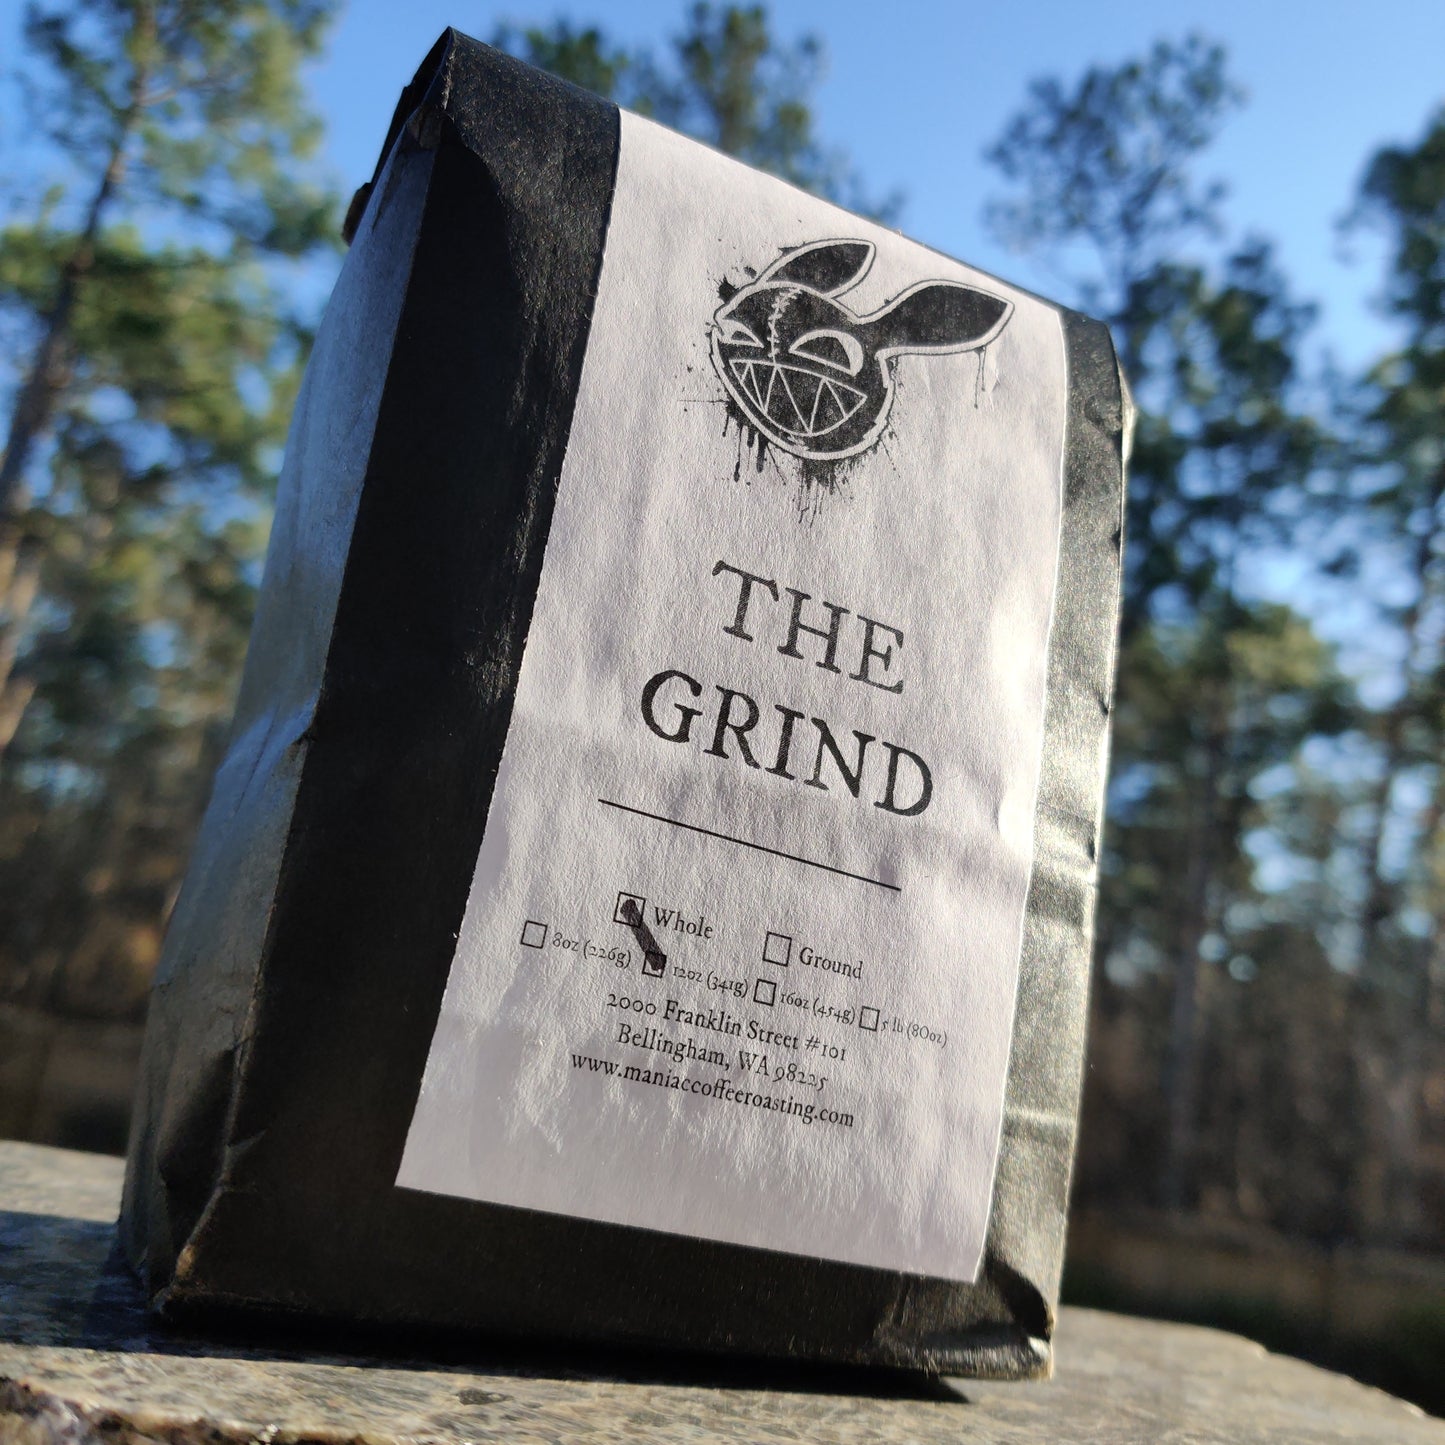 COFFEE - THE GRIND